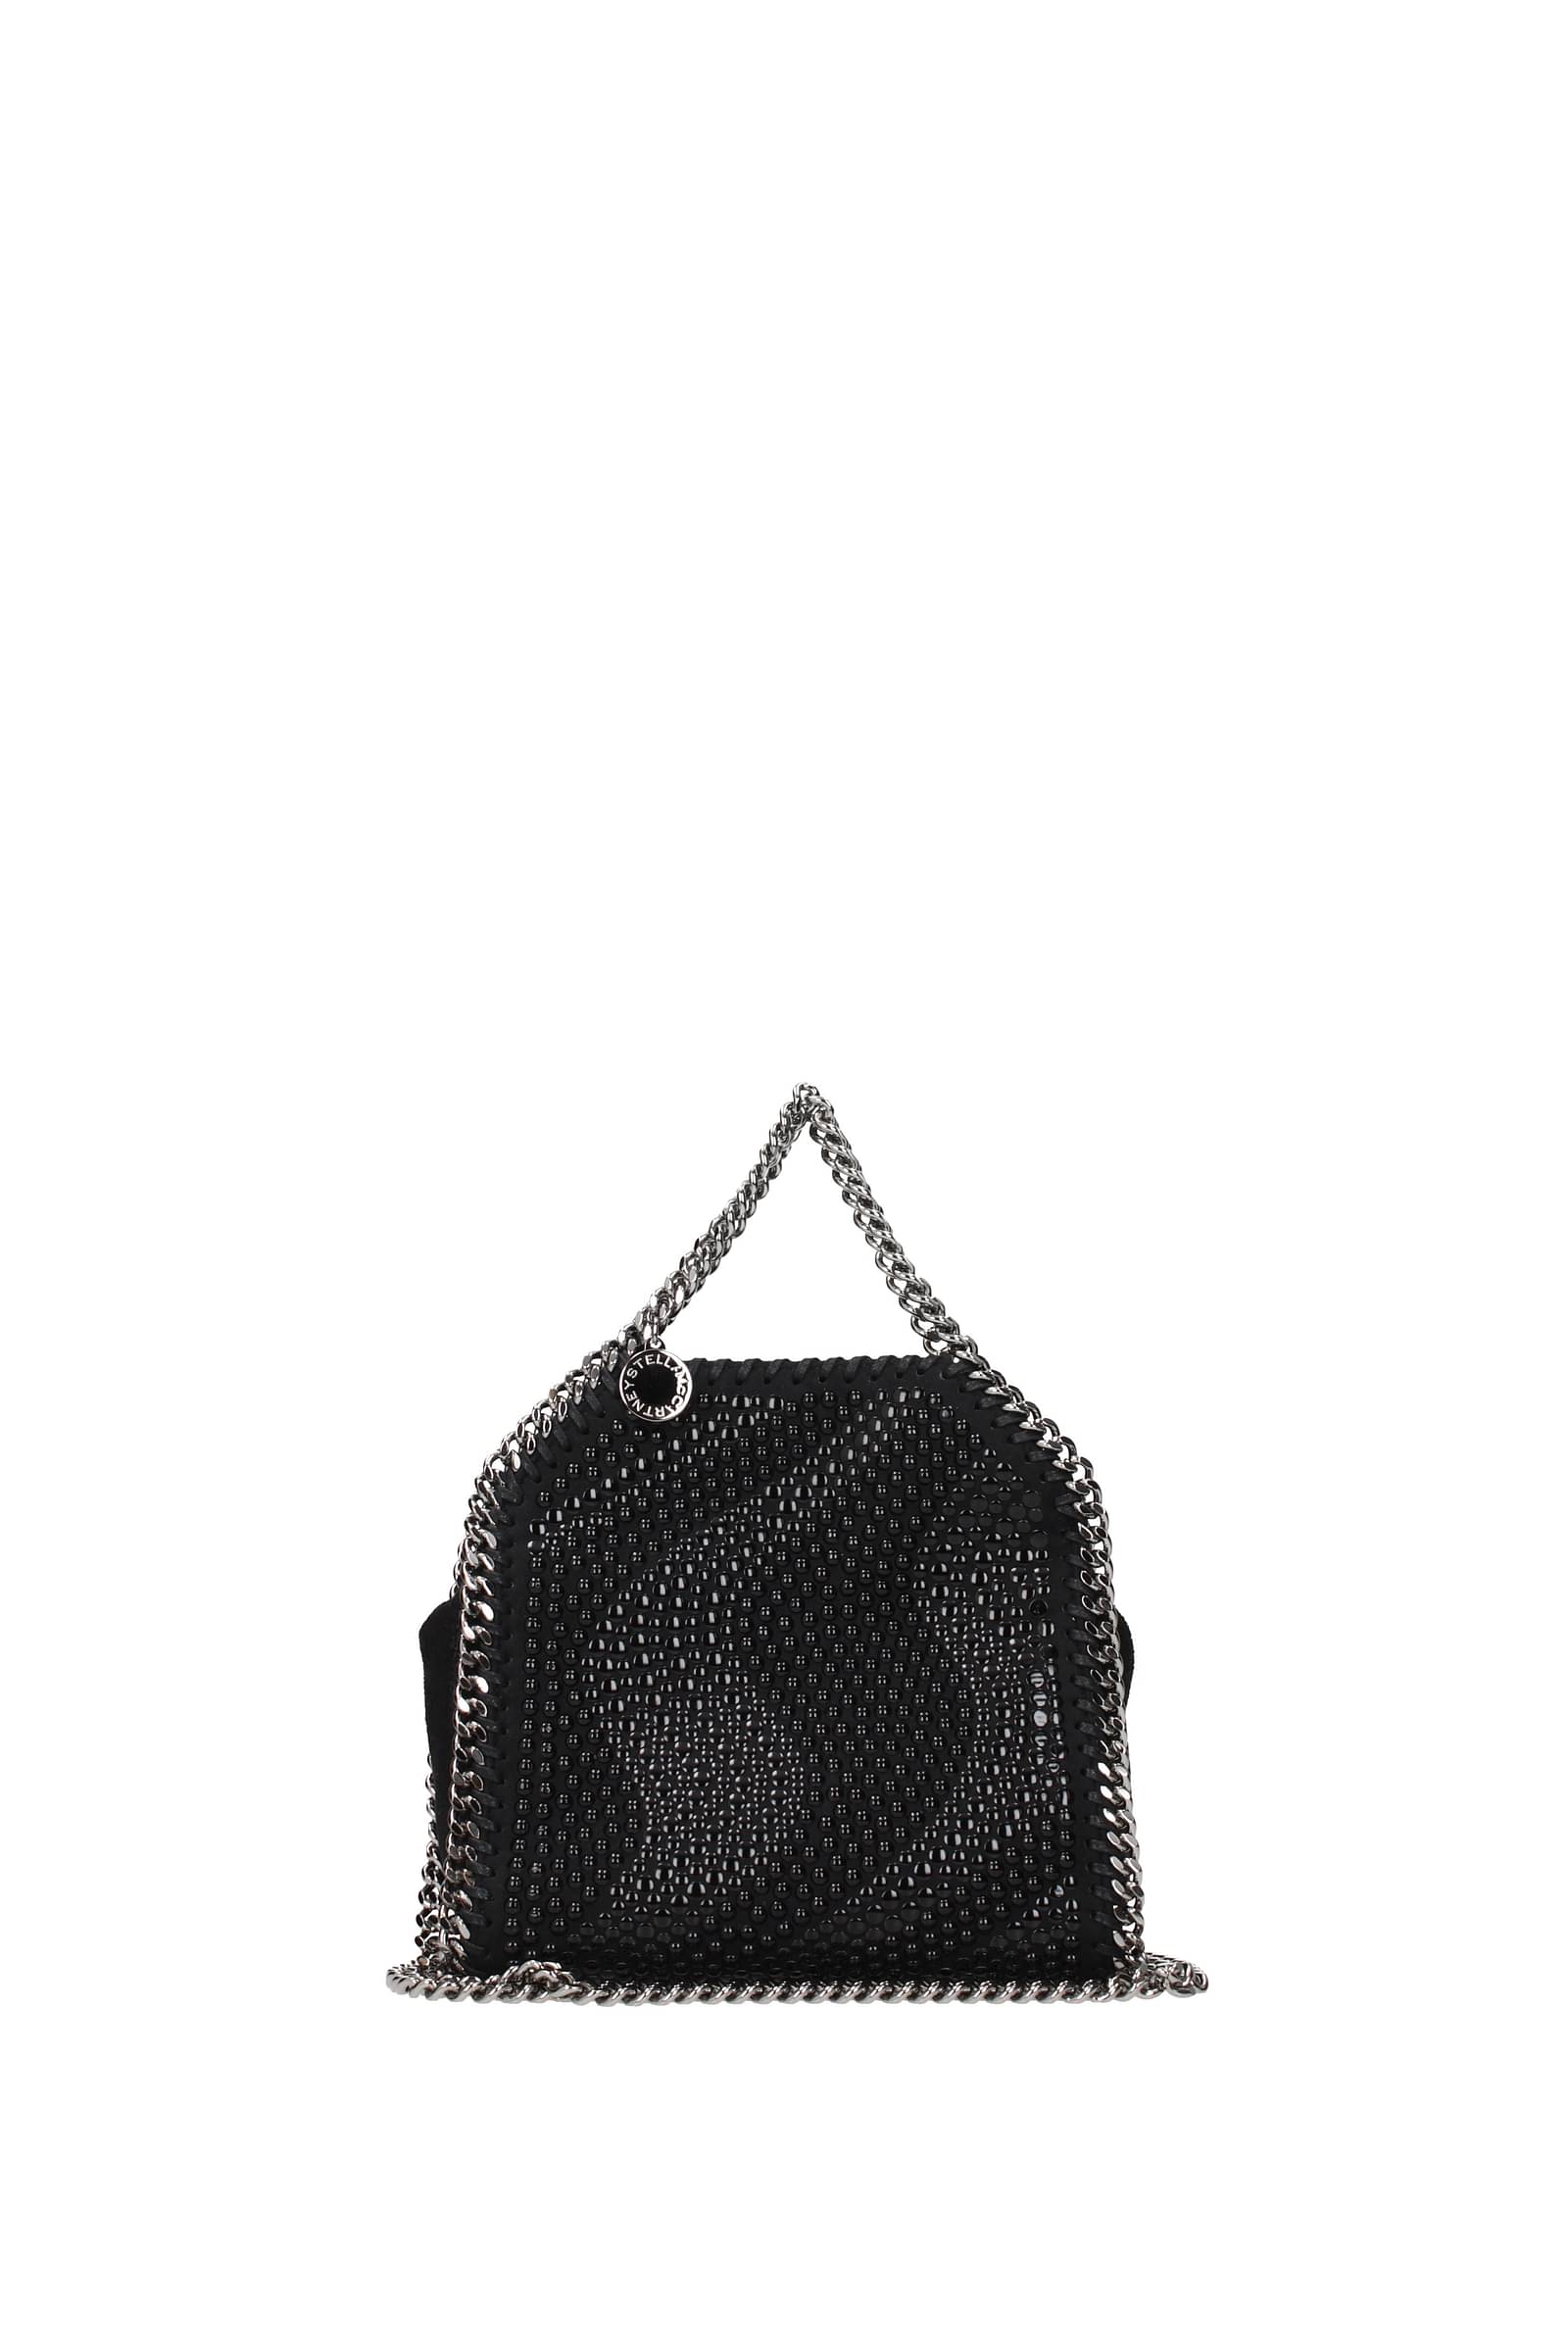 Women's Stella McCartney Bags Sale | Up to 70% Off | THE OUTNET